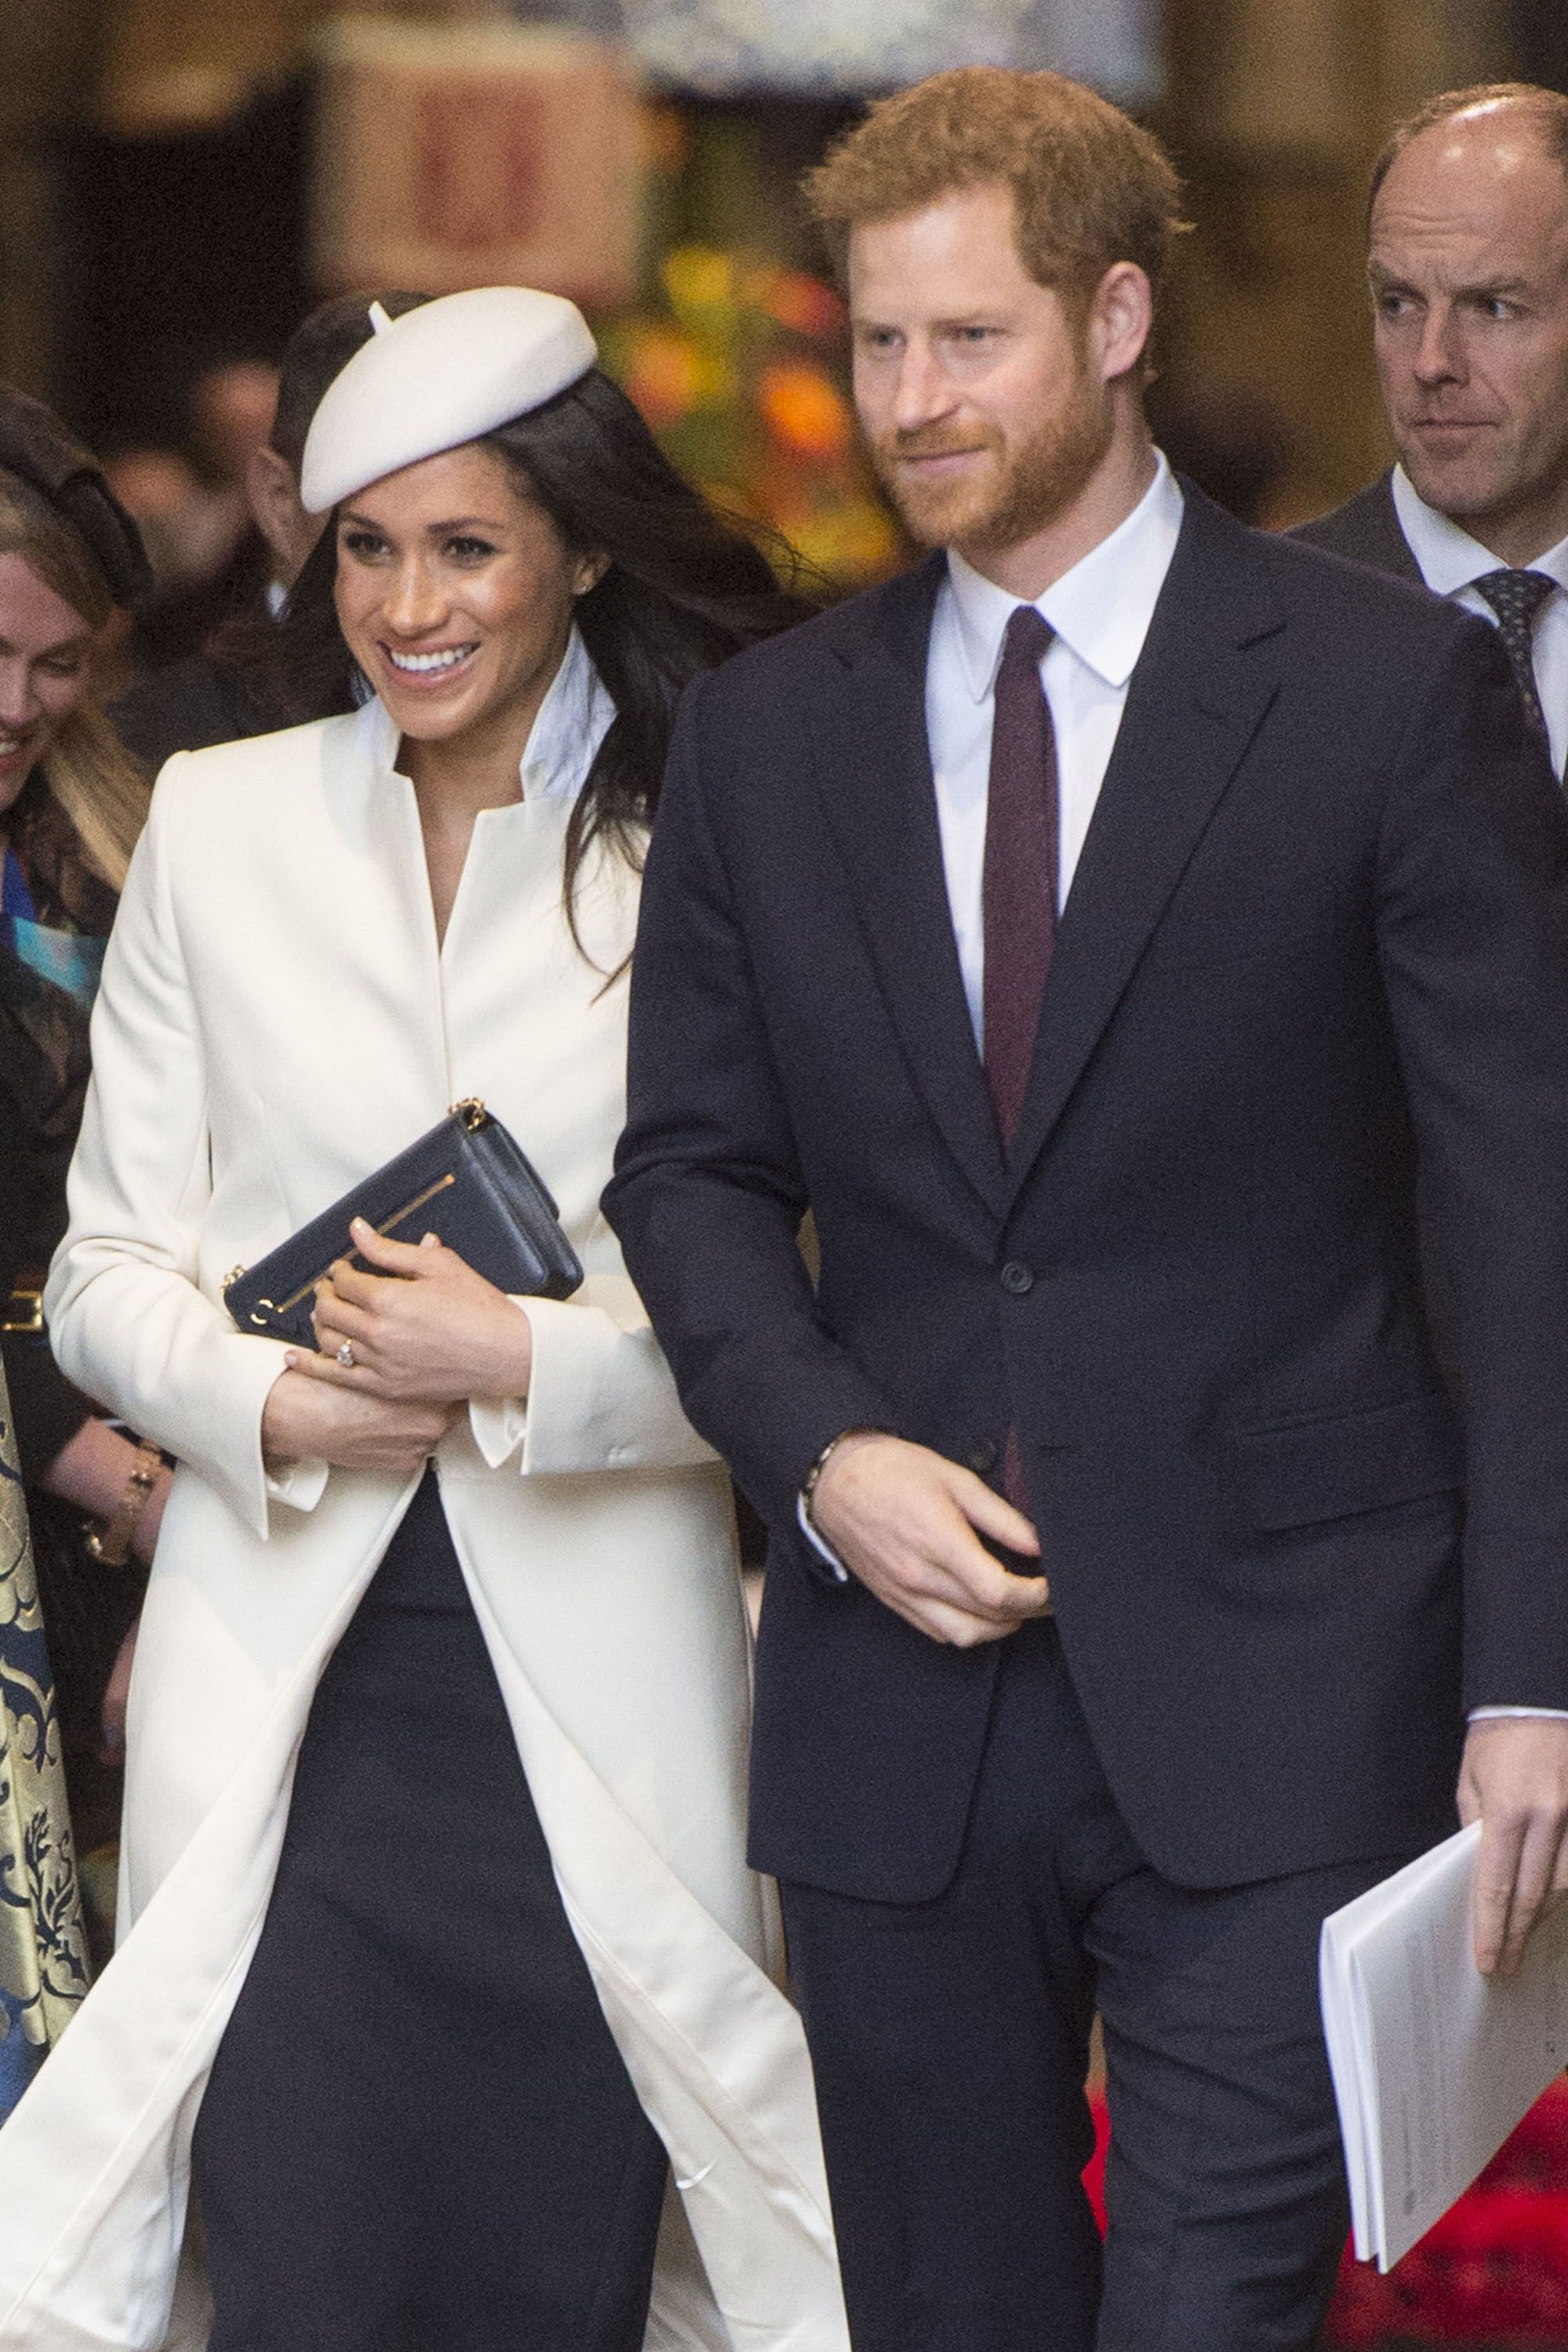 https://hips.hearstapps.com/hmg-prod.s3.amazonaws.com/images/hbz-prince-harry-meghan-markle-cute-moments-gettyimages-930997988-1523378908.jpg?crop=1xw:1xh;center,top